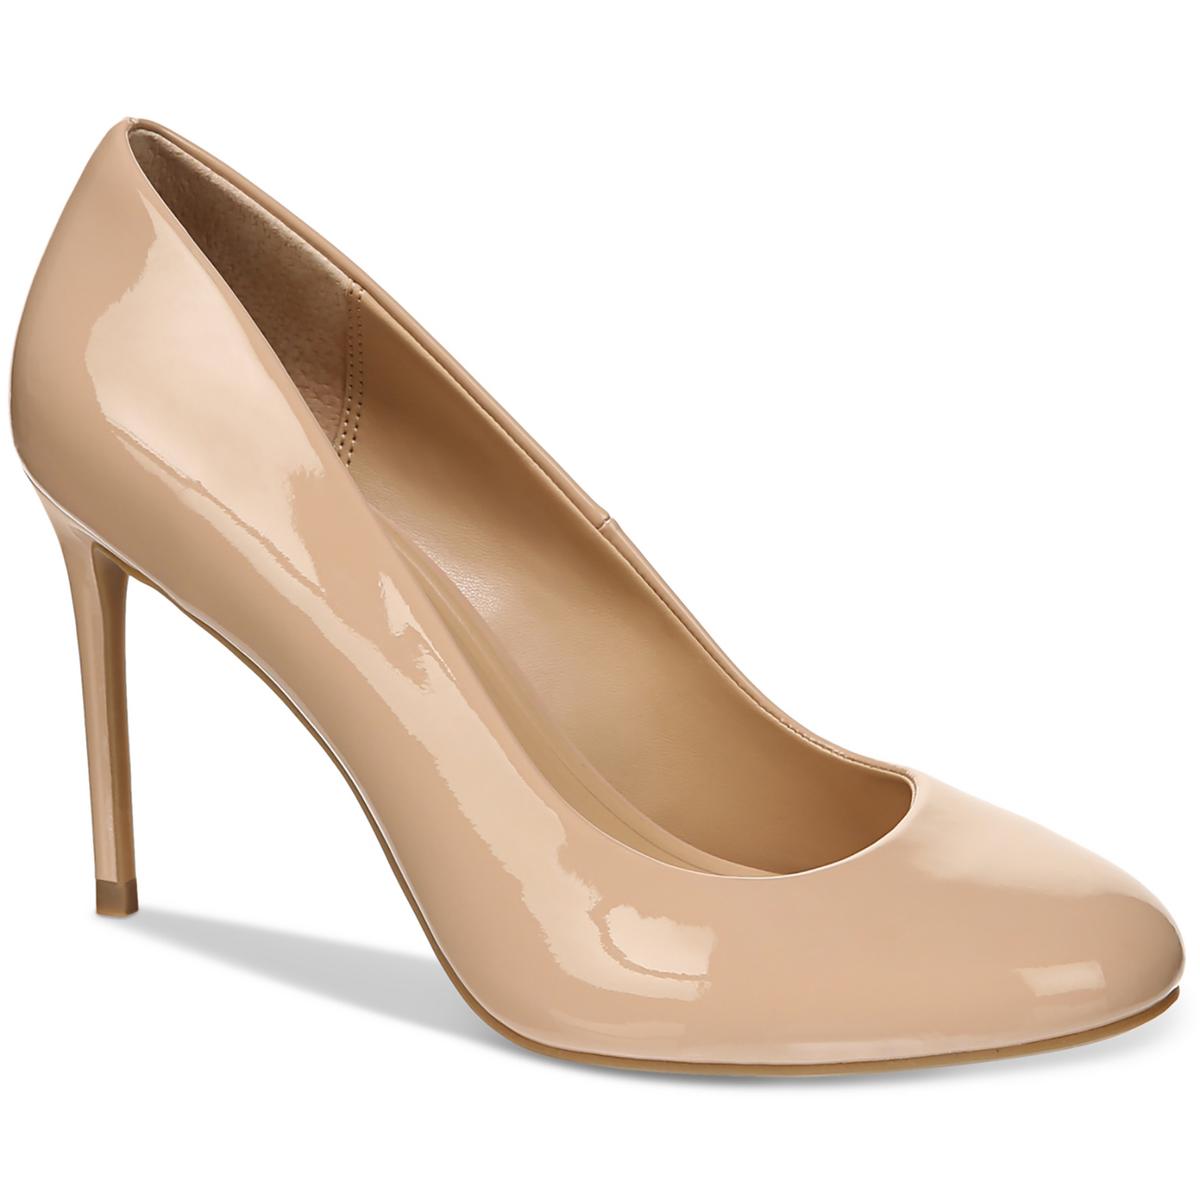 Selected Color is Nude Patent